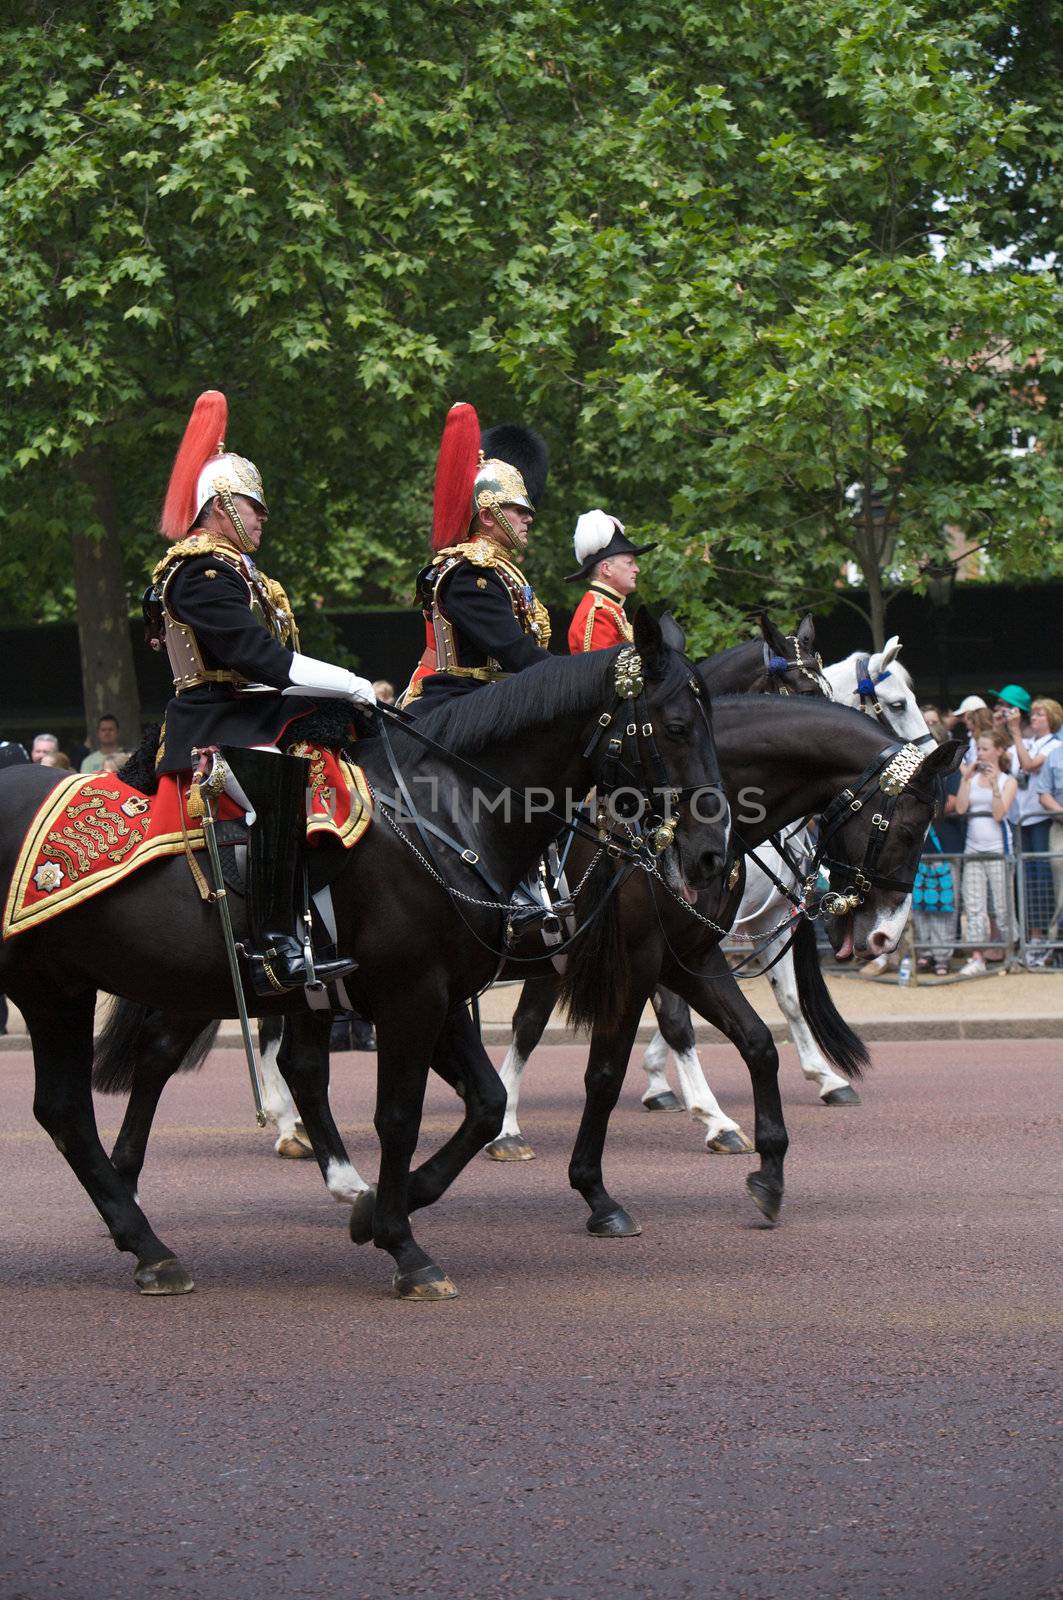 Tropping of the Colour, Queen's birthday by instinia